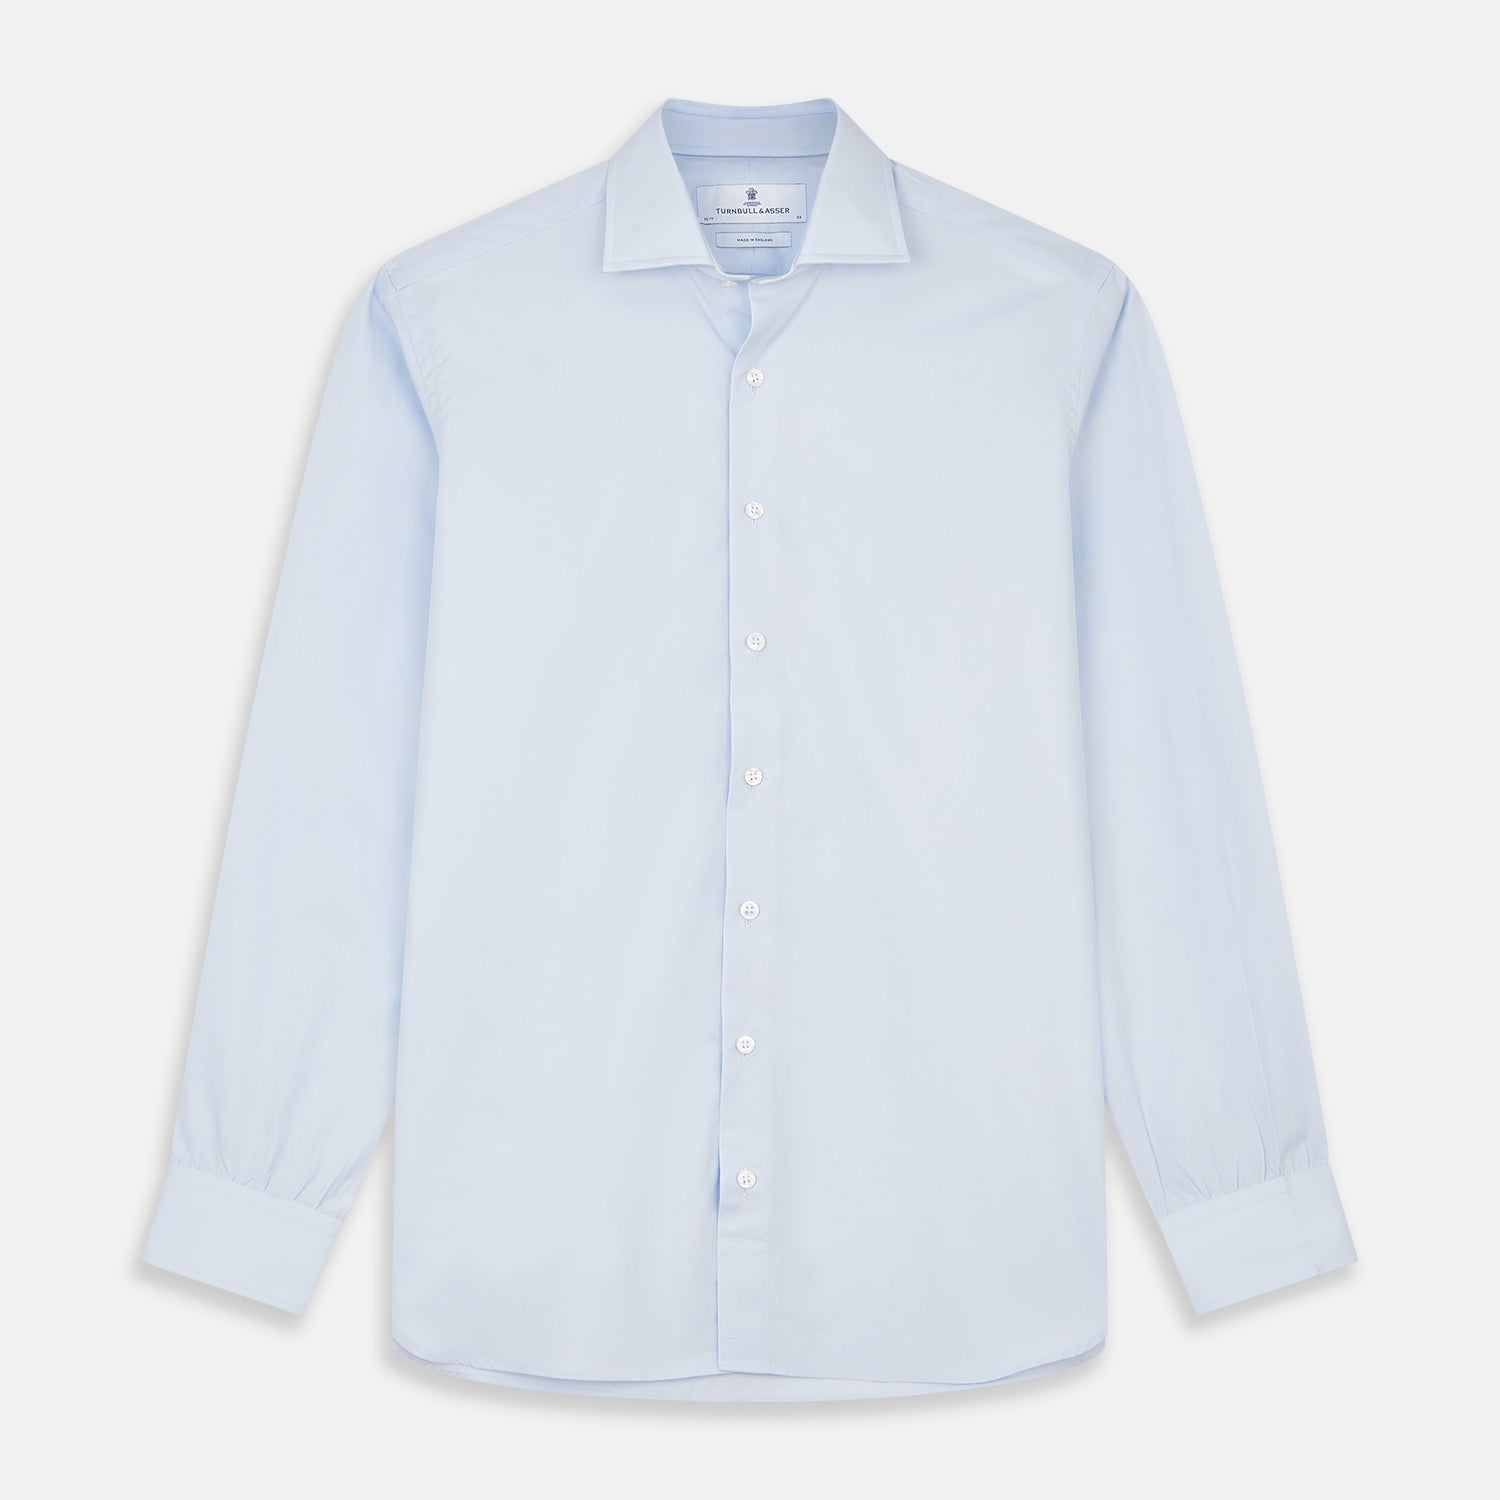 Tailored Fit Light Blue Cotton Shirt with Kent Collar and 3-Button Cuffs